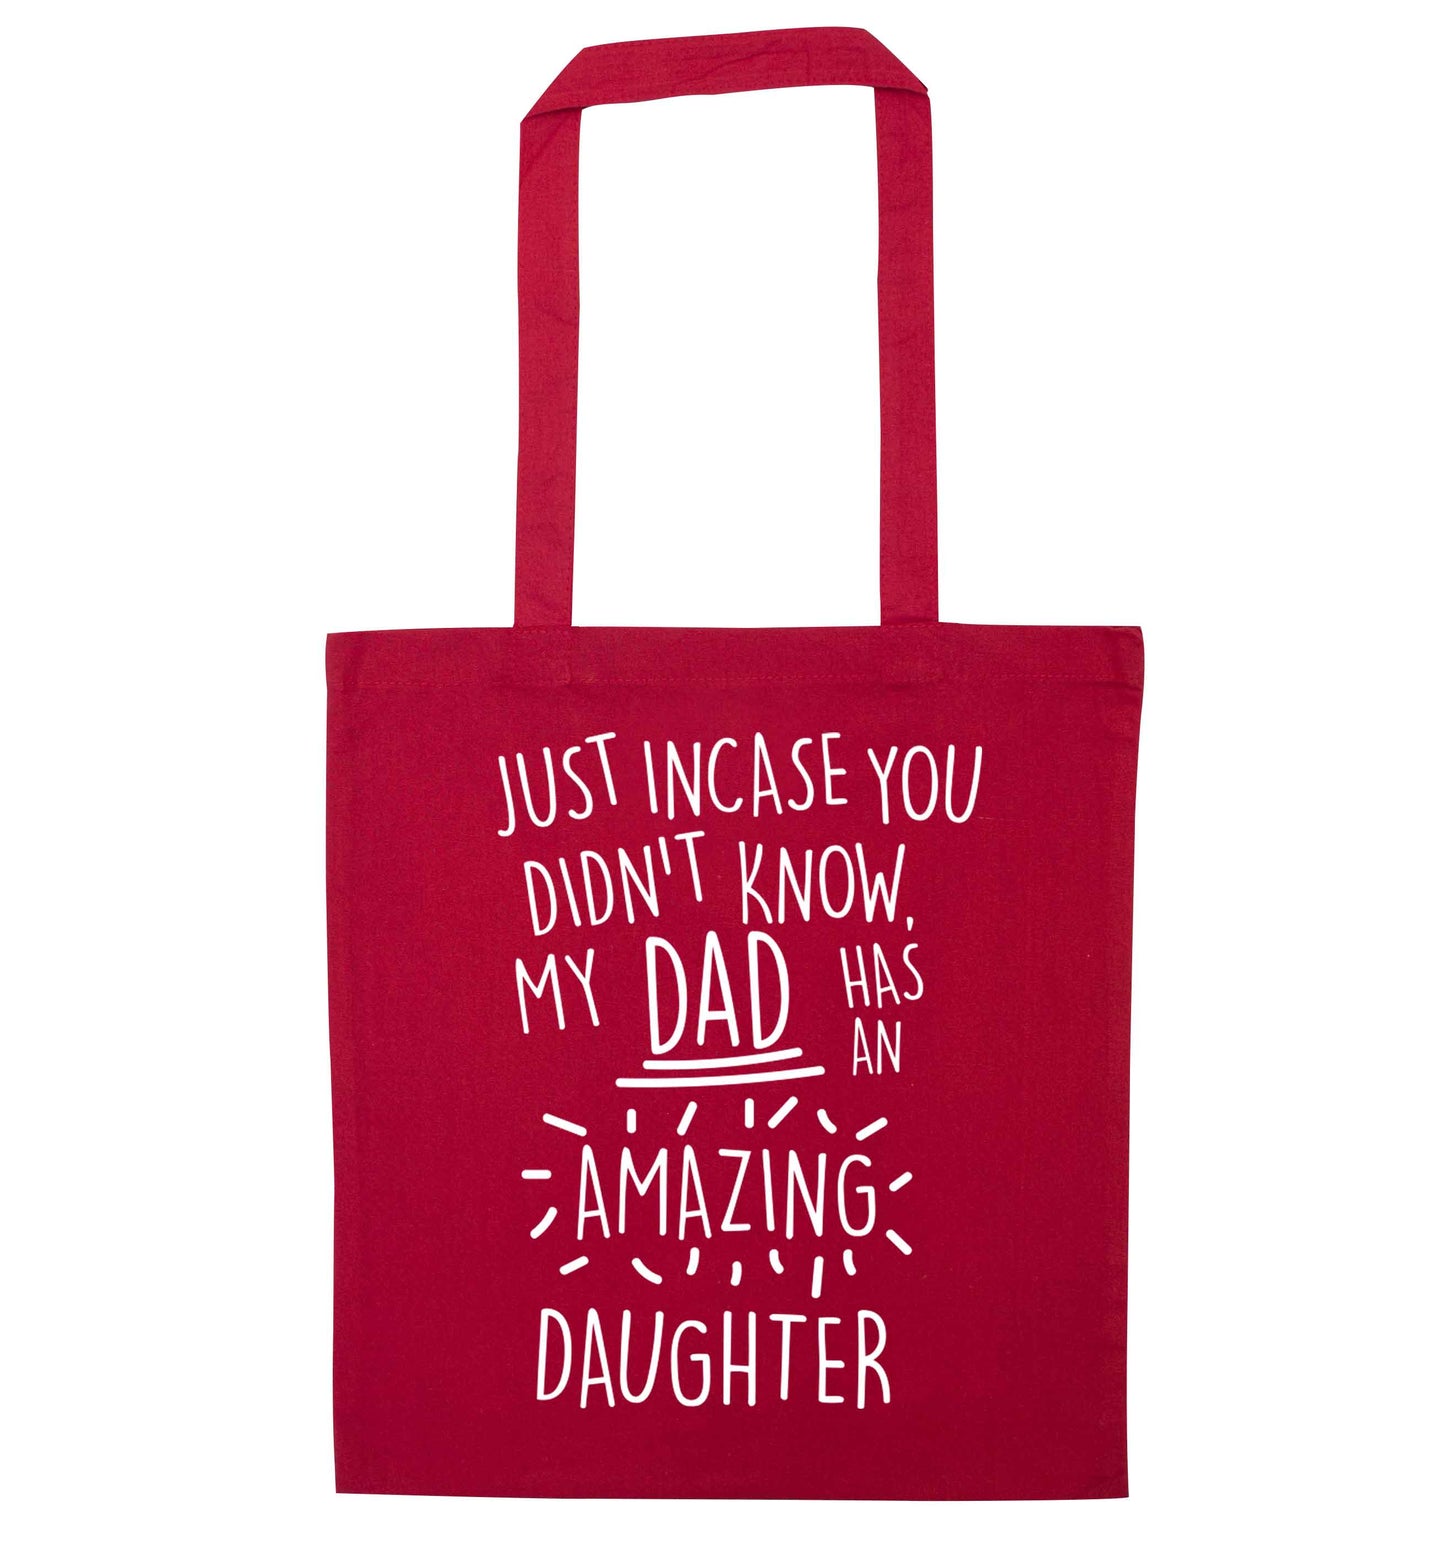 Just incase you didn't know my dad has an amazing daughter red tote bag